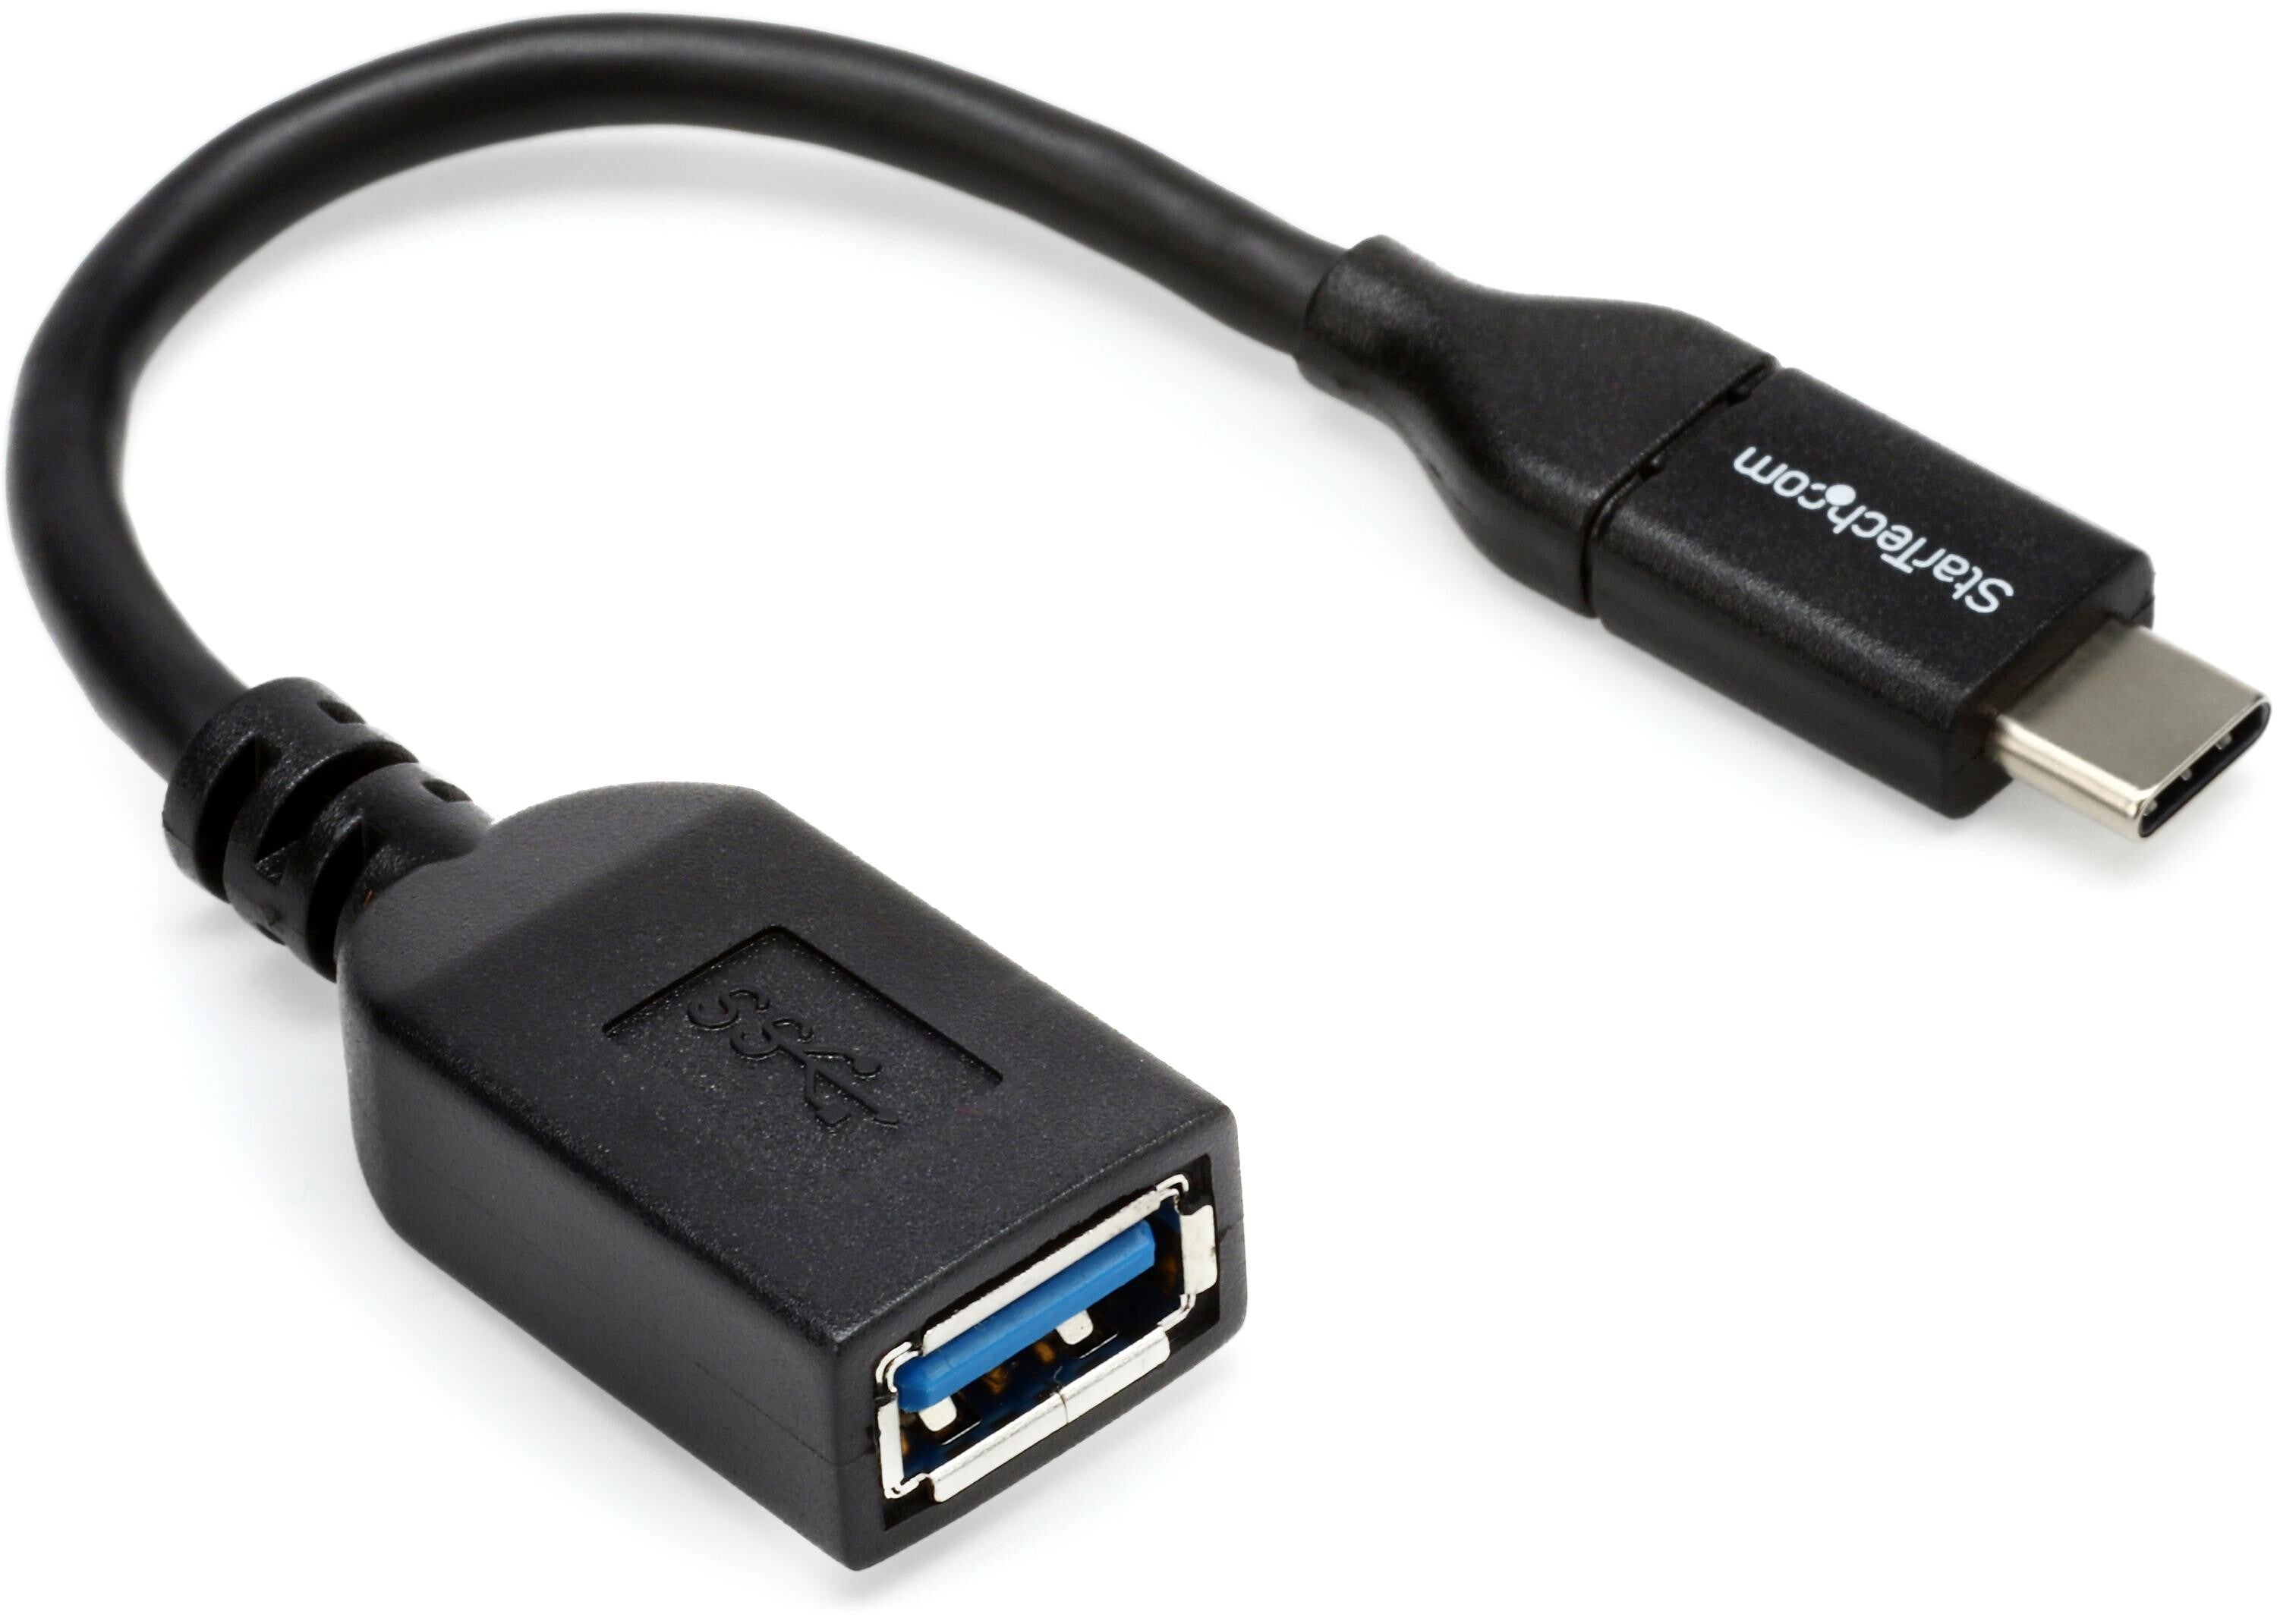 Type C Usb 3.0 Female Adapter Usb-c Adapter For Notebooks Or Other  Qualified